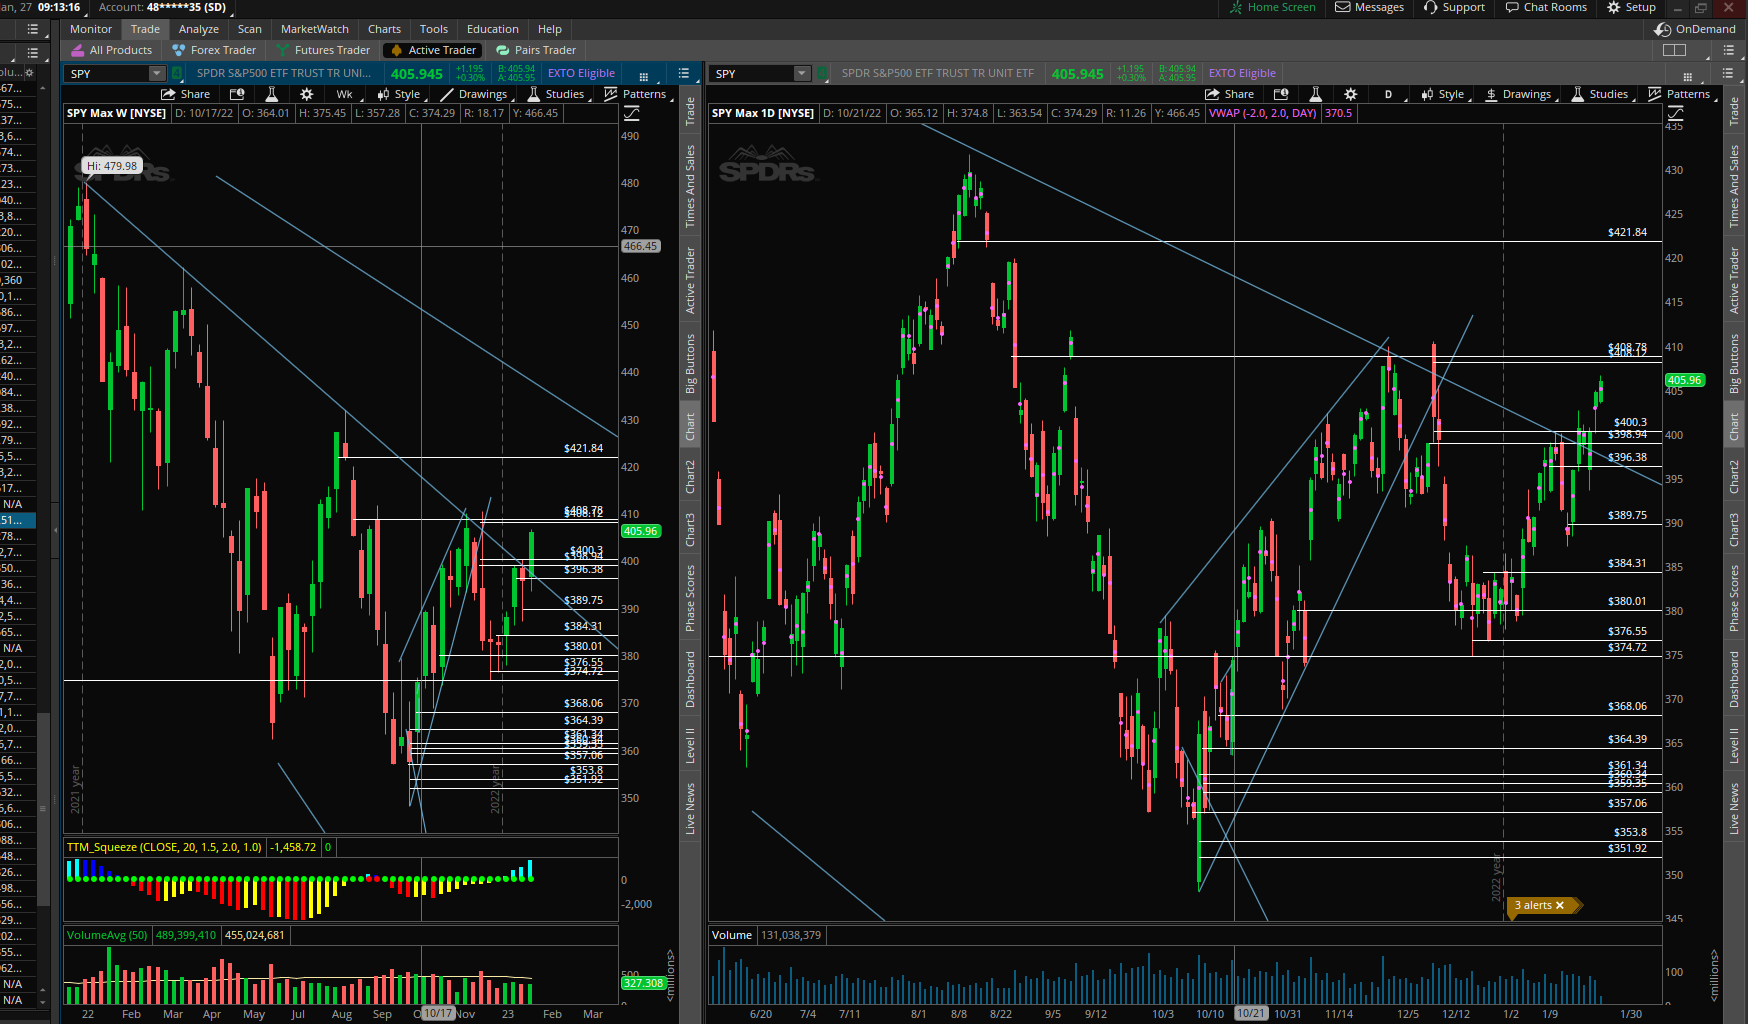 $SPY Chart Weekly and Daily Break out